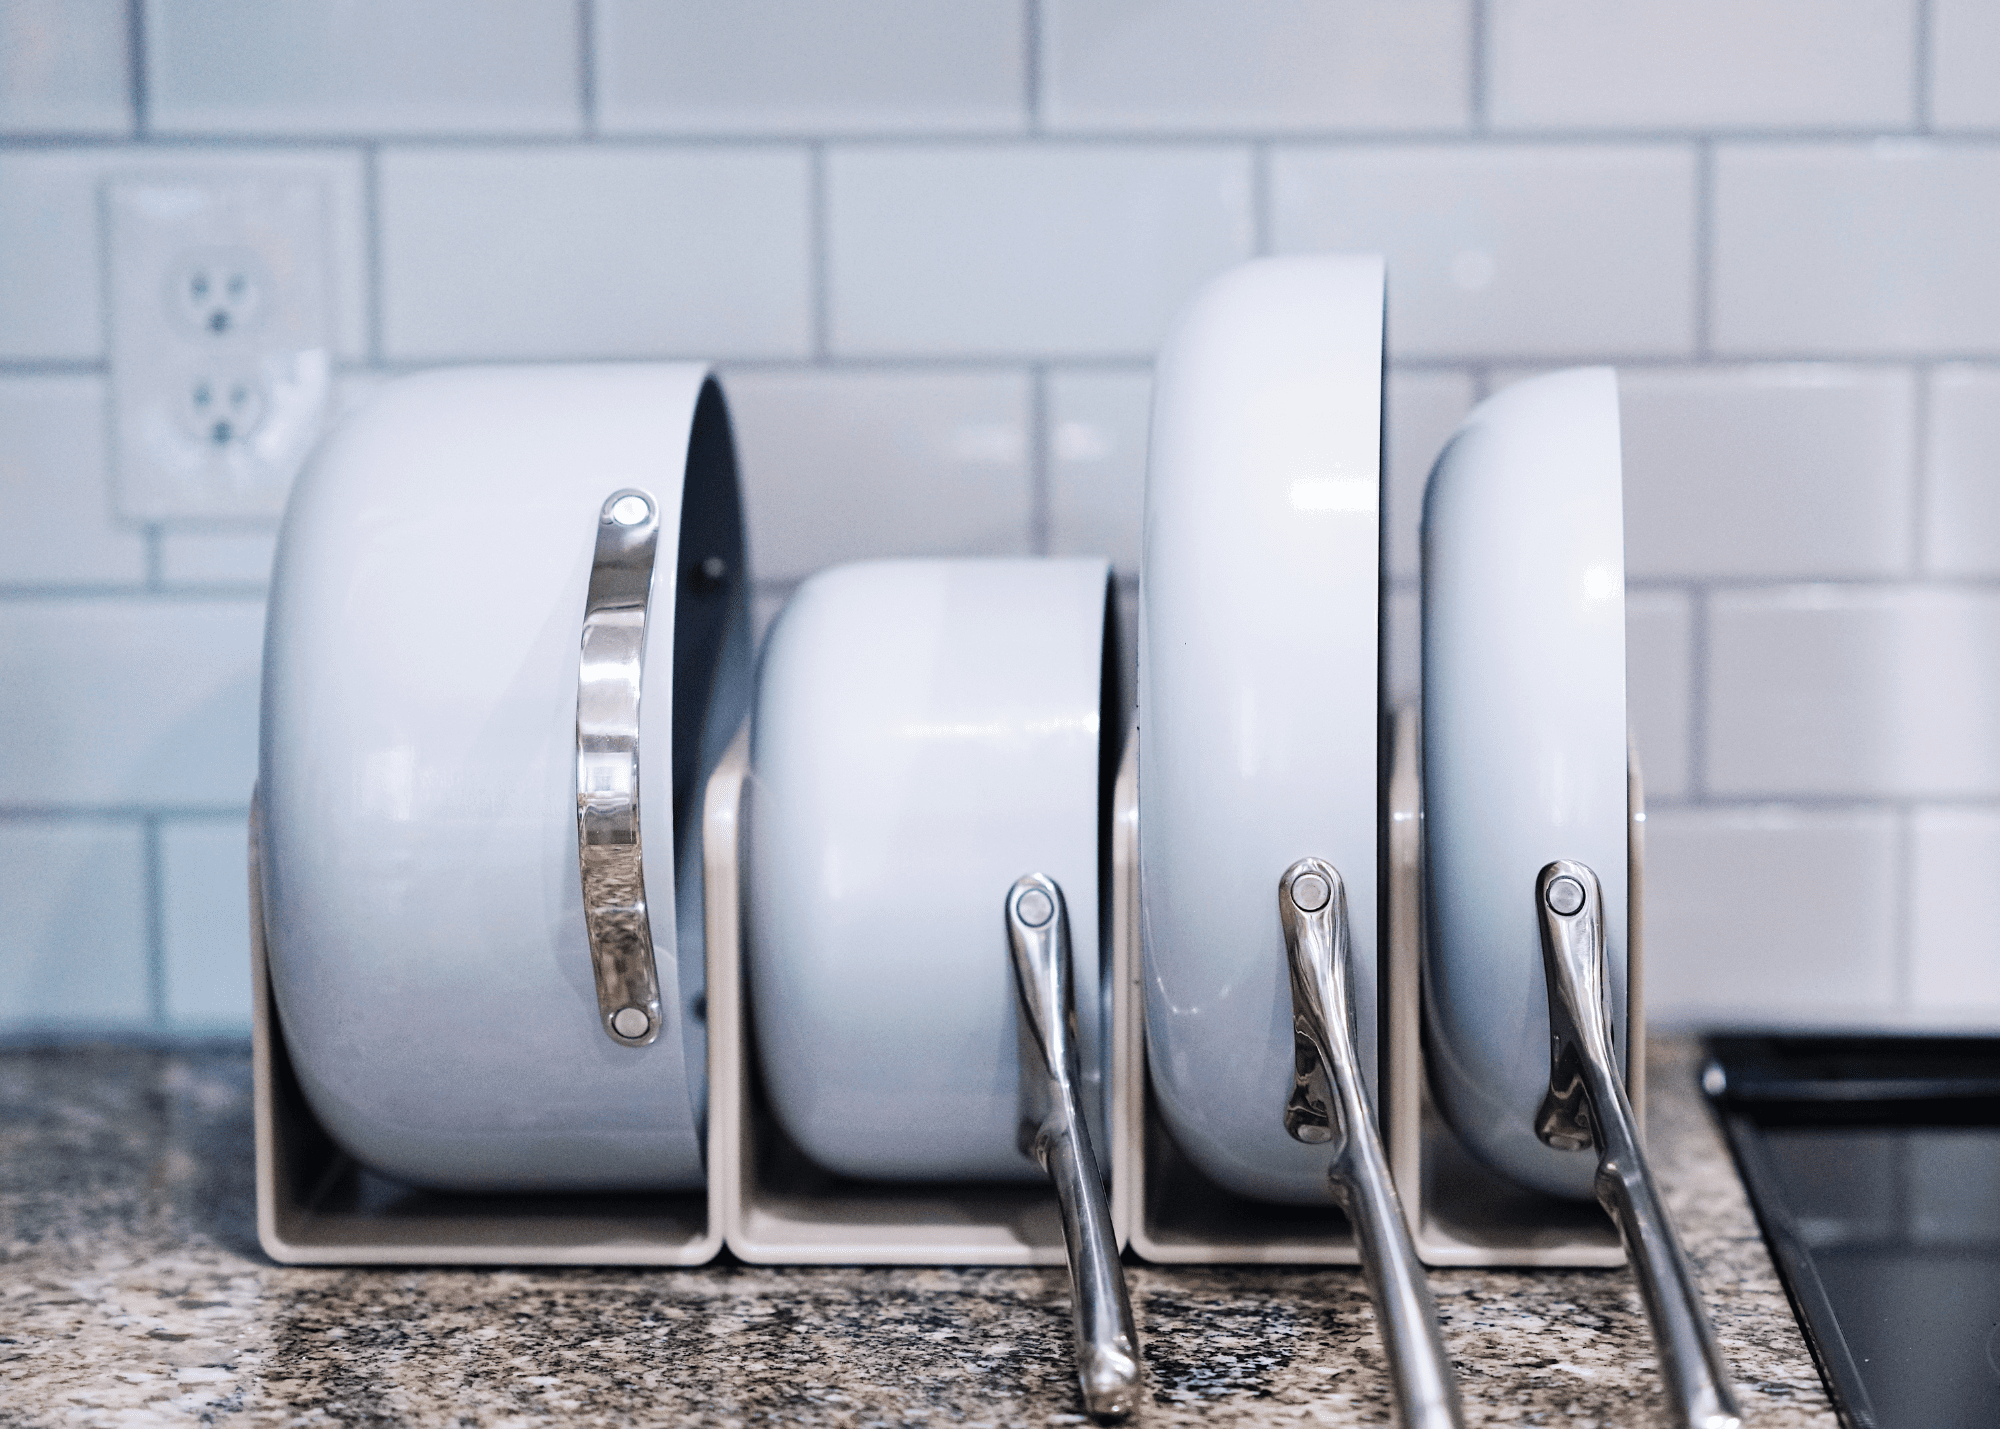 We Tried The Caraway Cookware Storage Caddies, Here's Our Full Review